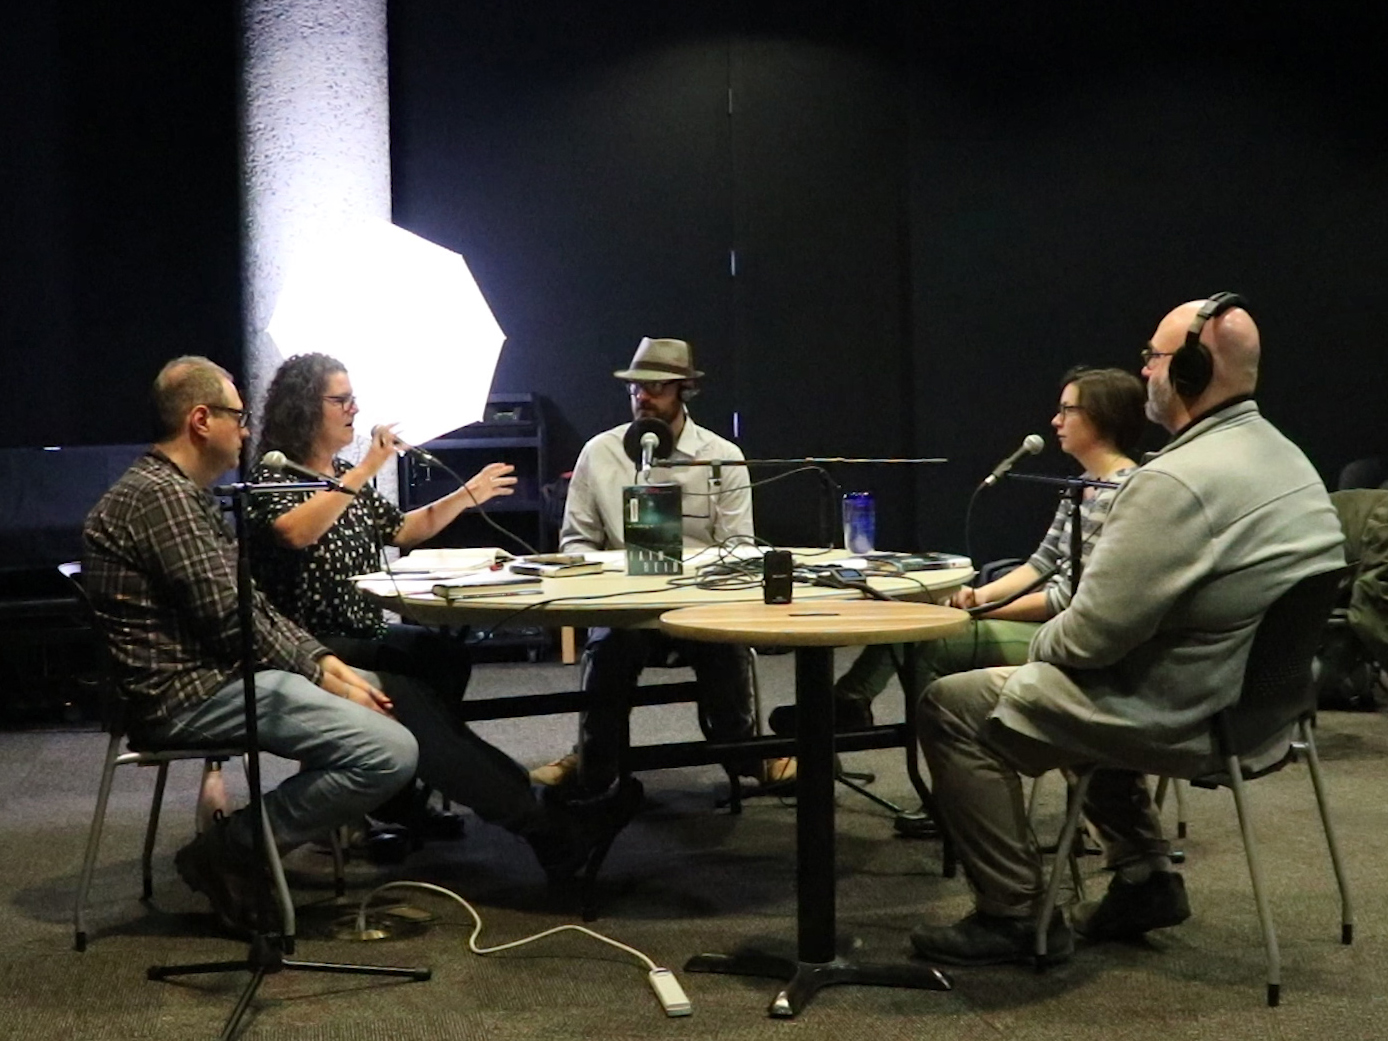 Five people sitting at a table recording the Time to Read podcast in the Carol Shields Auditorium at the Millennium Library